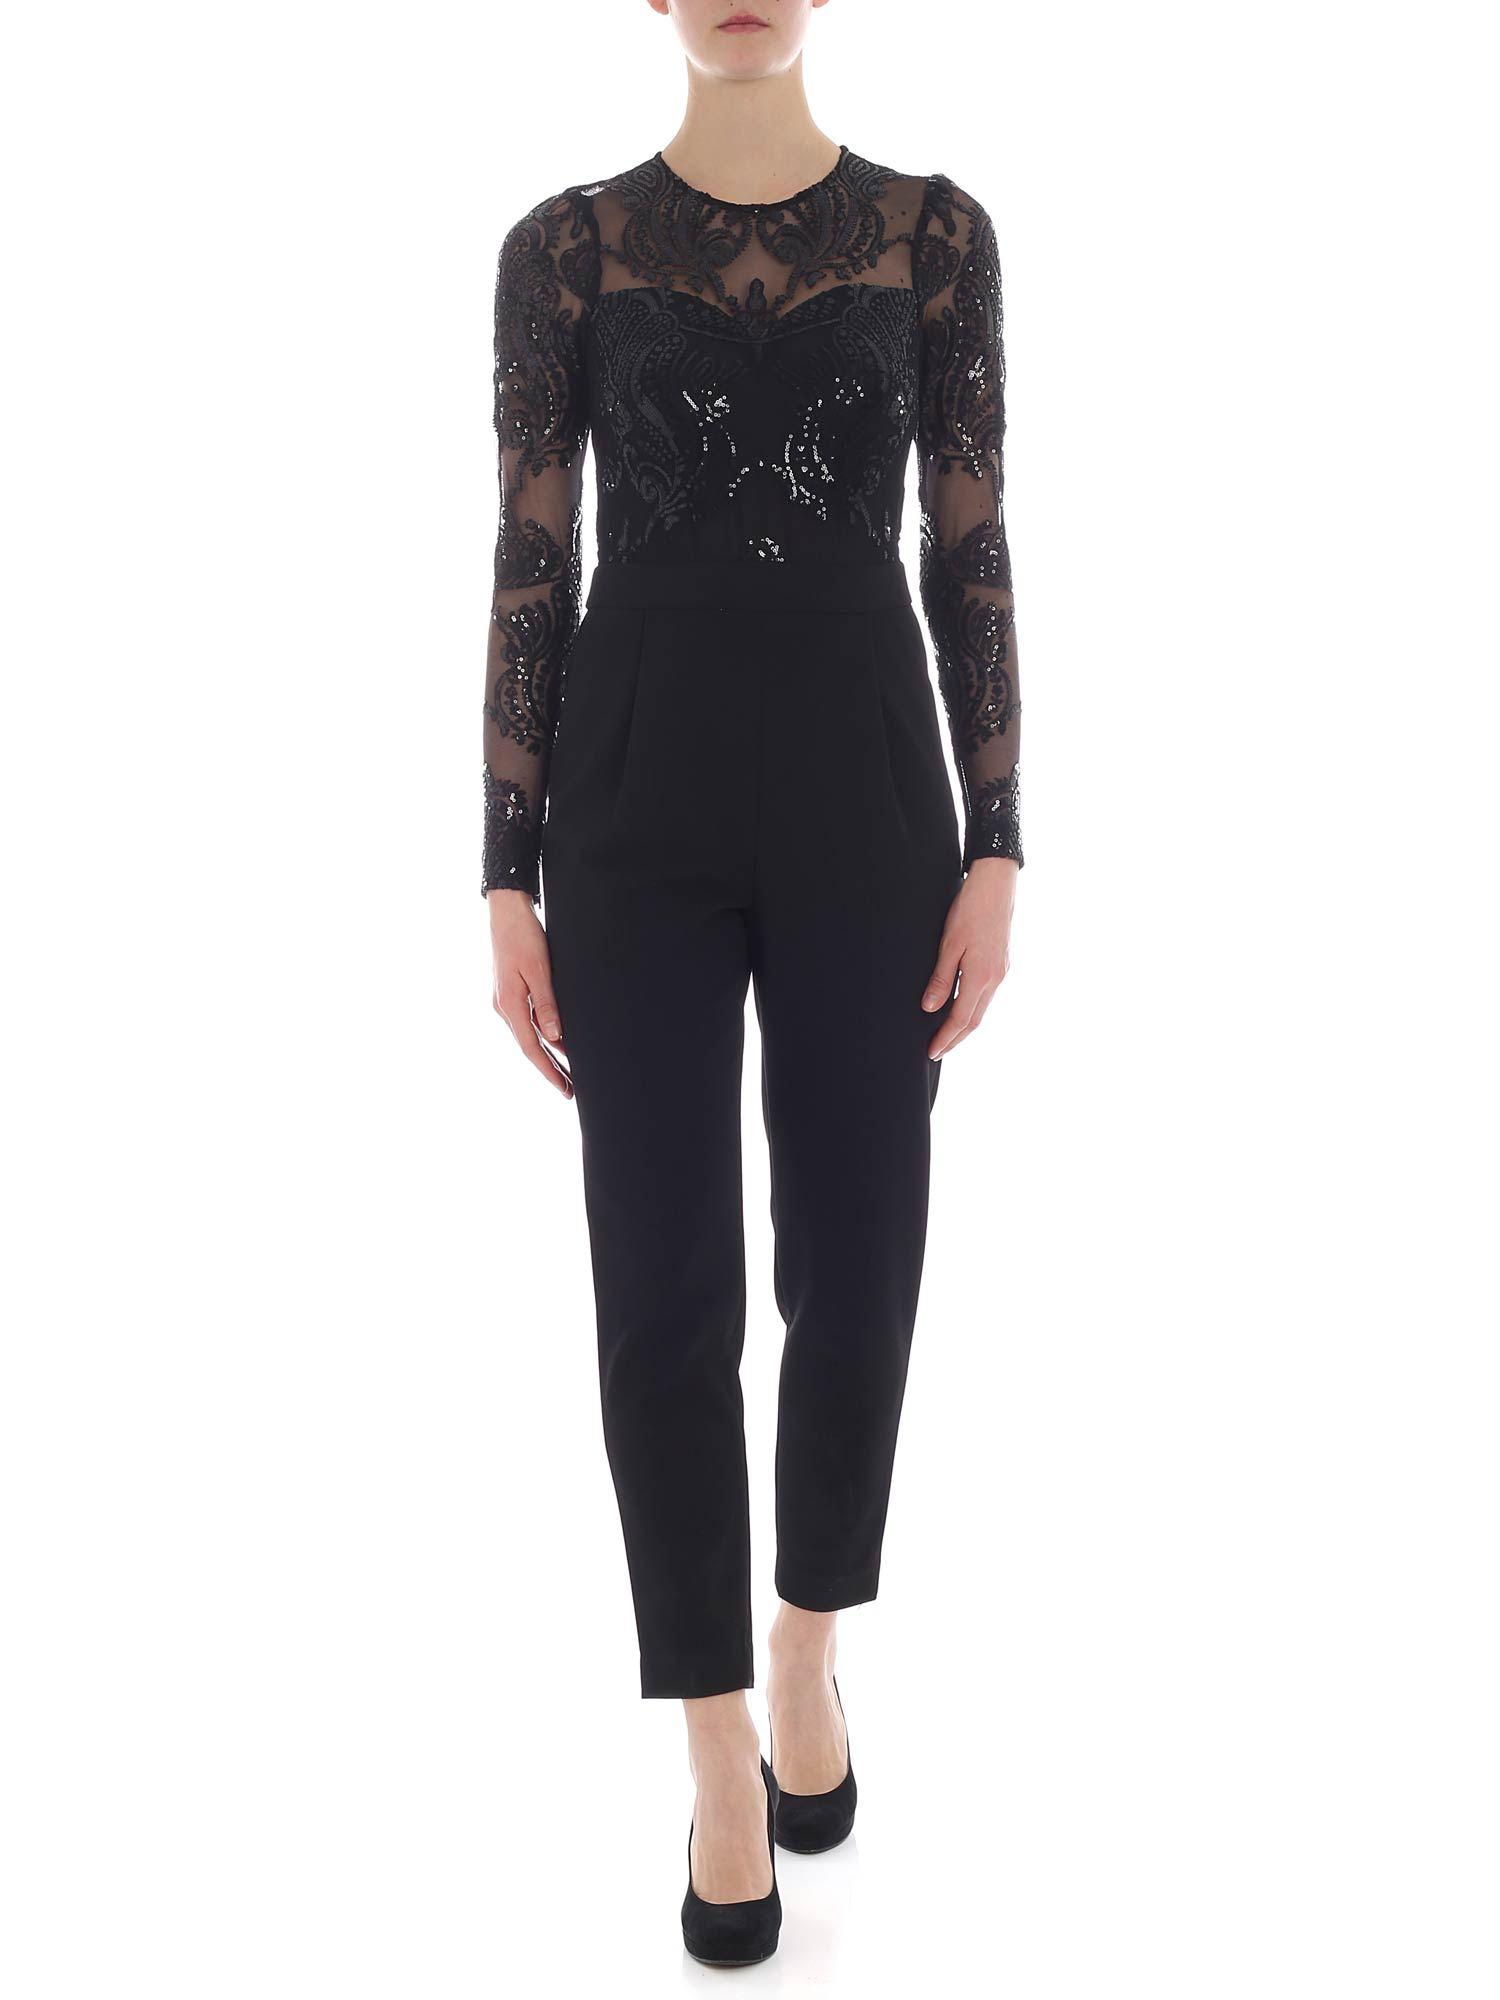 Michael Kors Black Jumpsuit With Lace Top And Sequins - Lyst